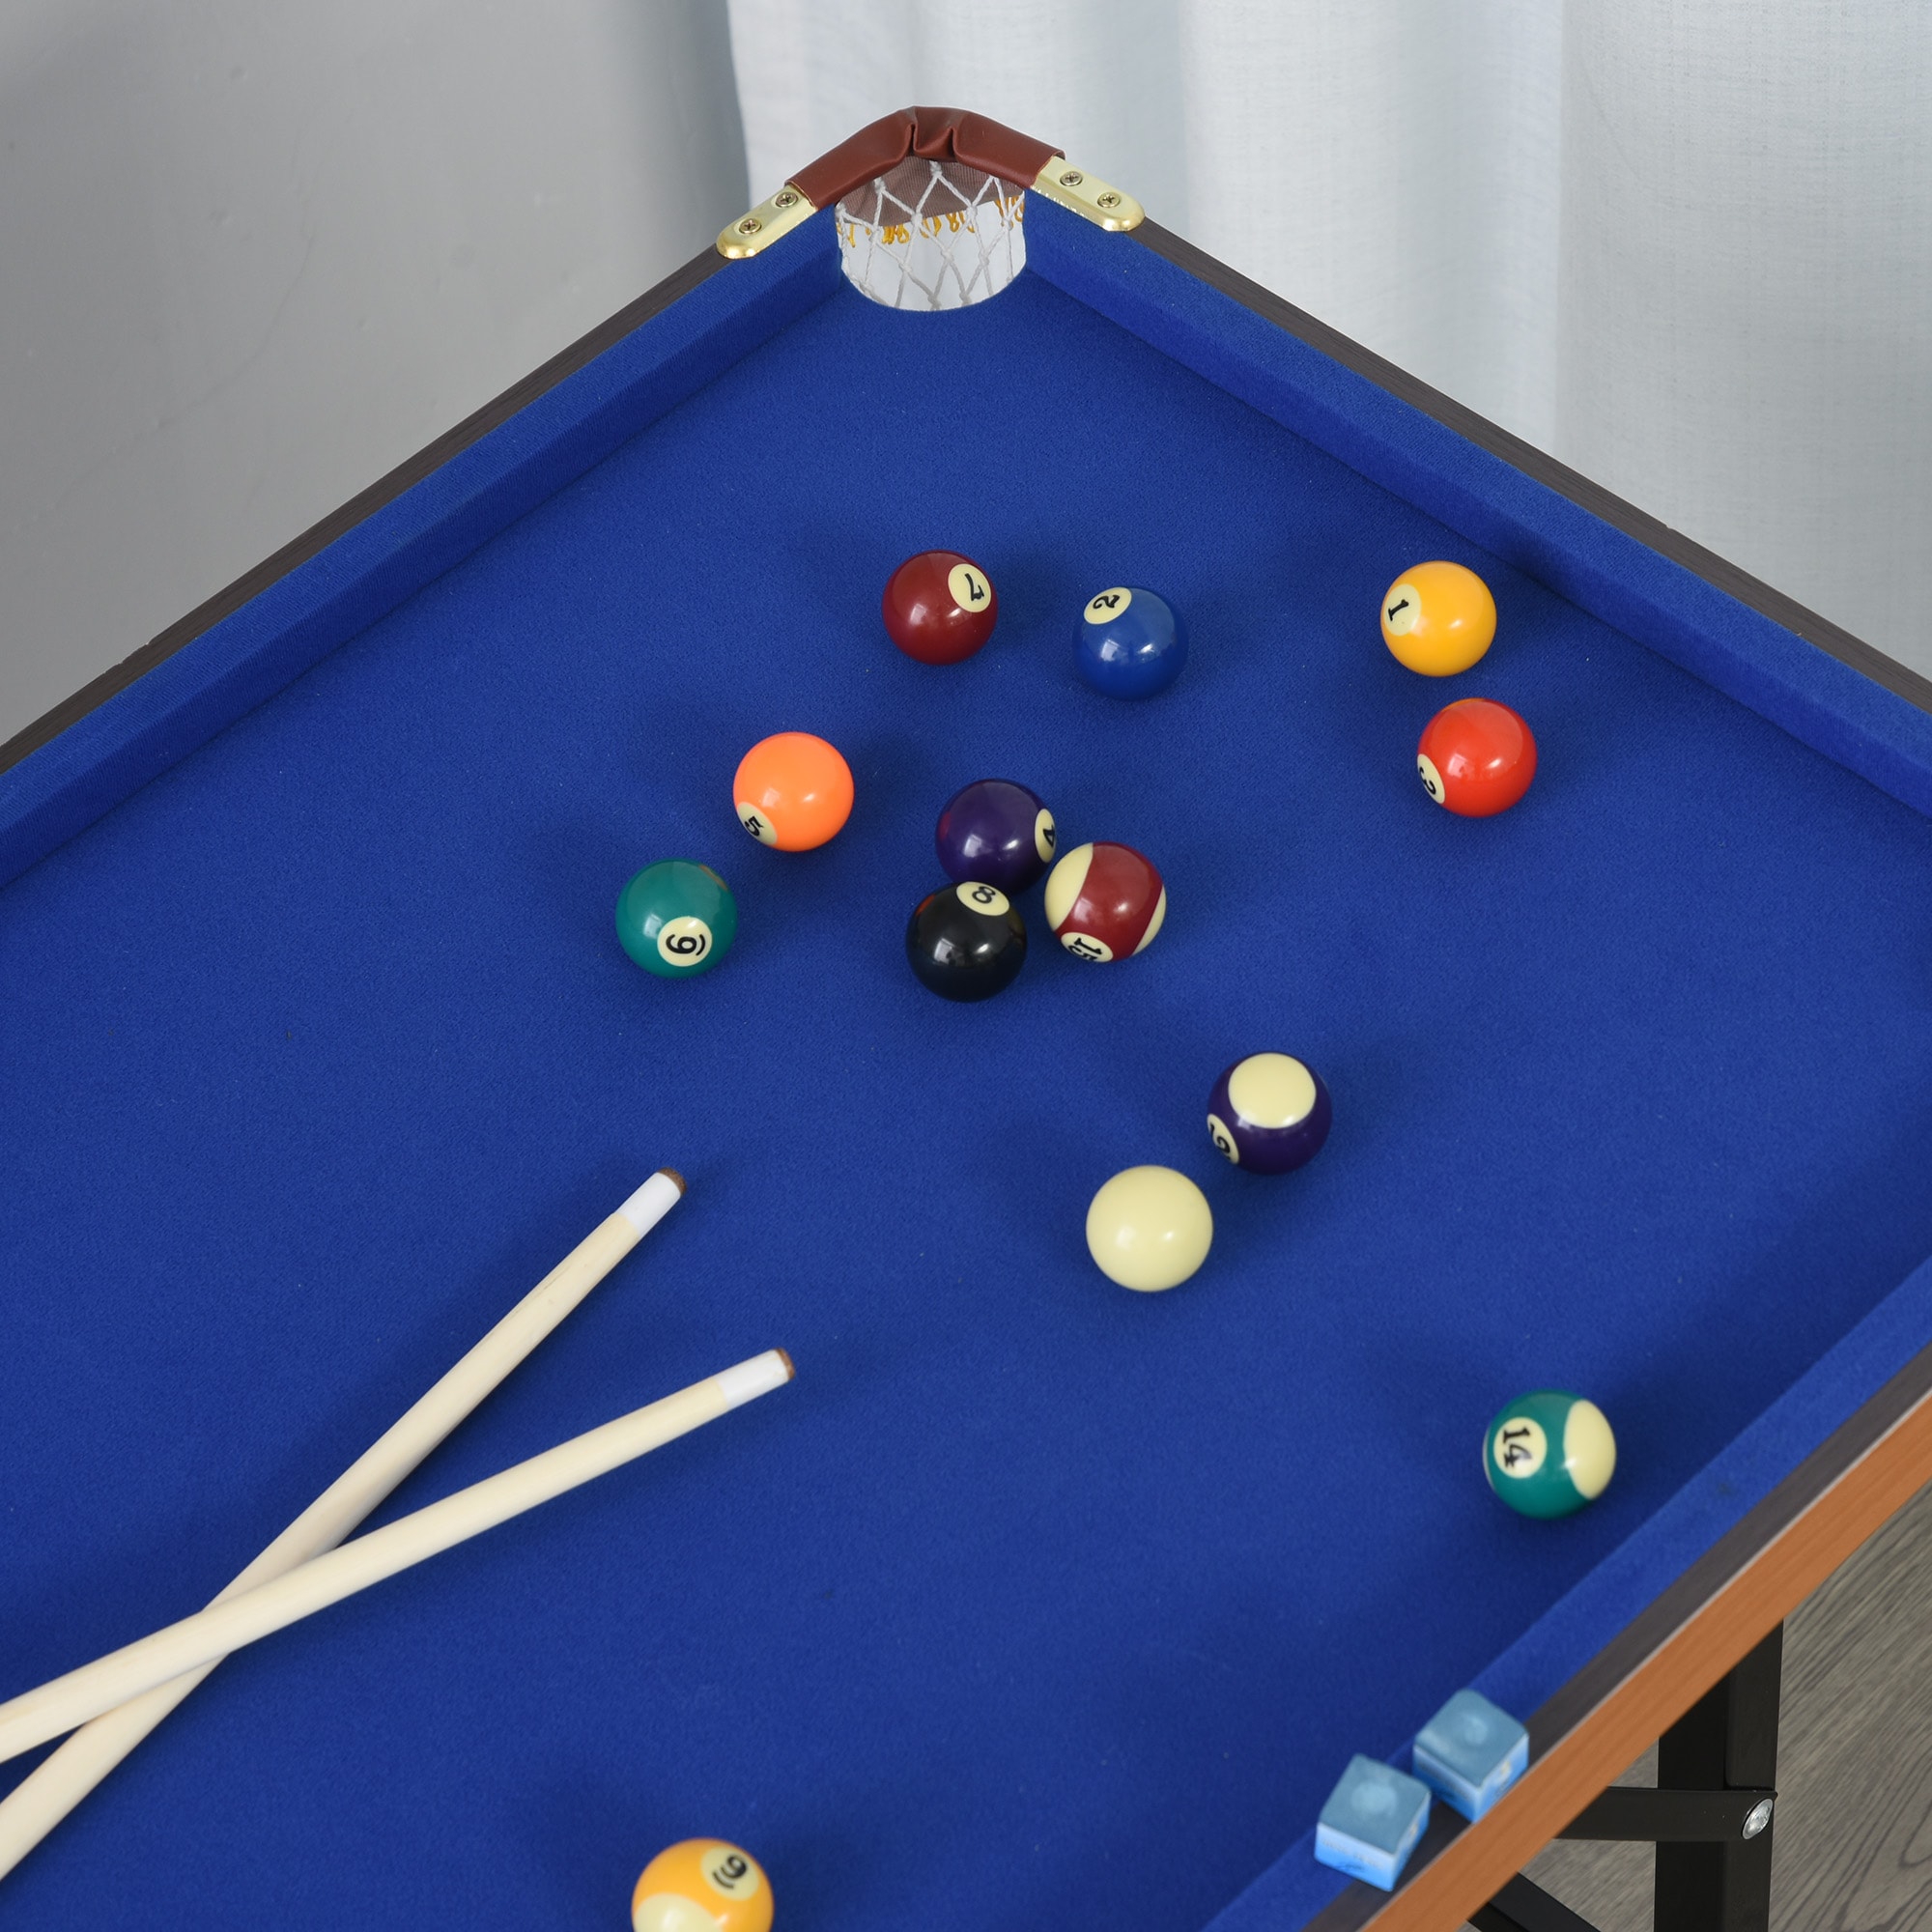 Pool tables in the bawl room at 360 MALL  Pool table, Entertaining,  Billiard table